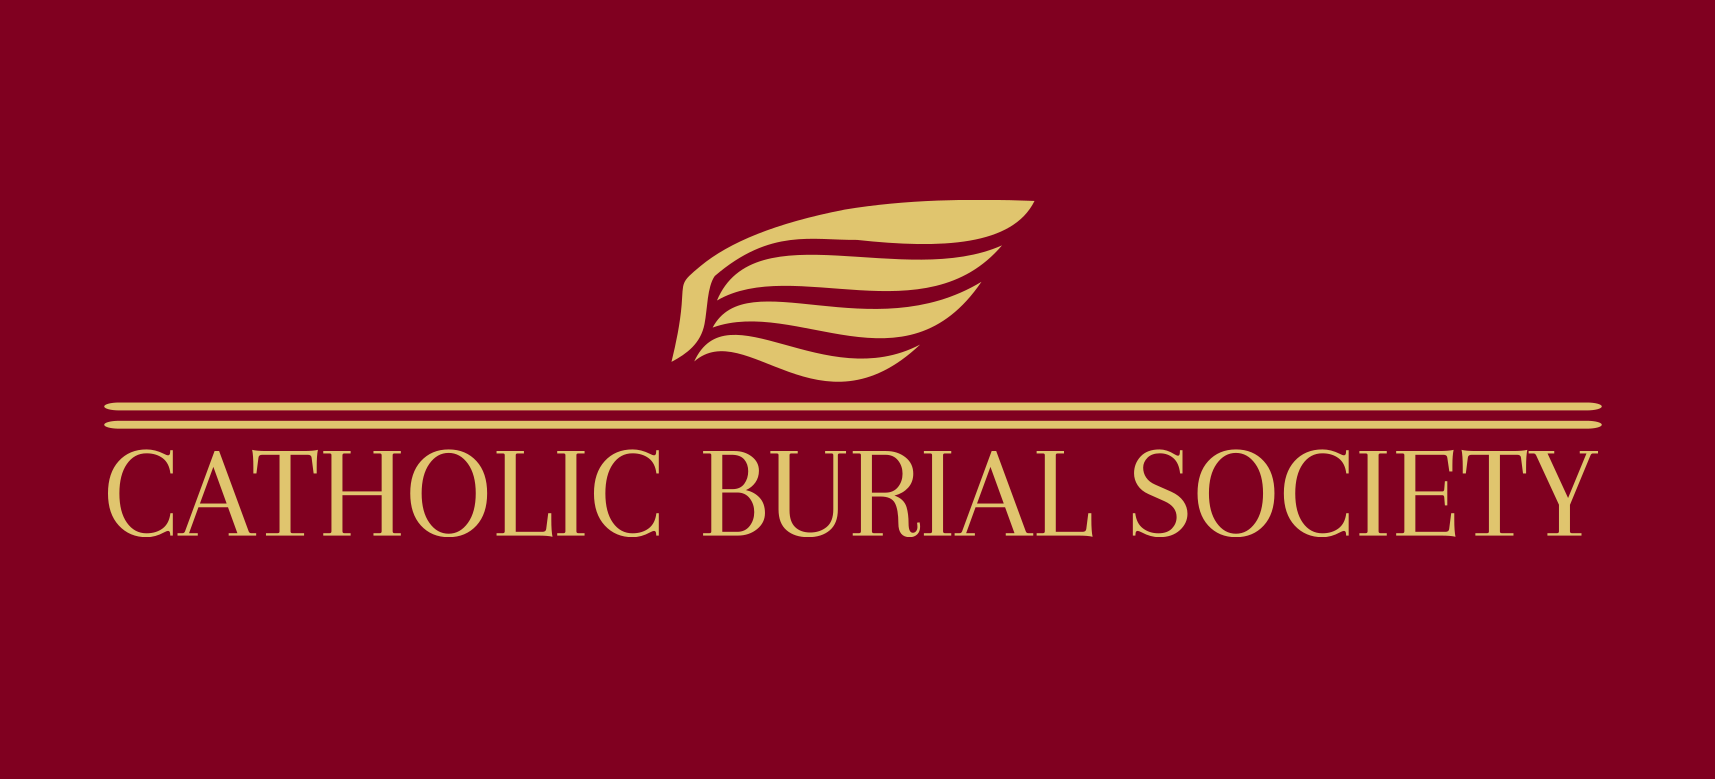 Catholic Burial Society | Funeral Home & Cremation Services in Media PA | (610) 892-7506